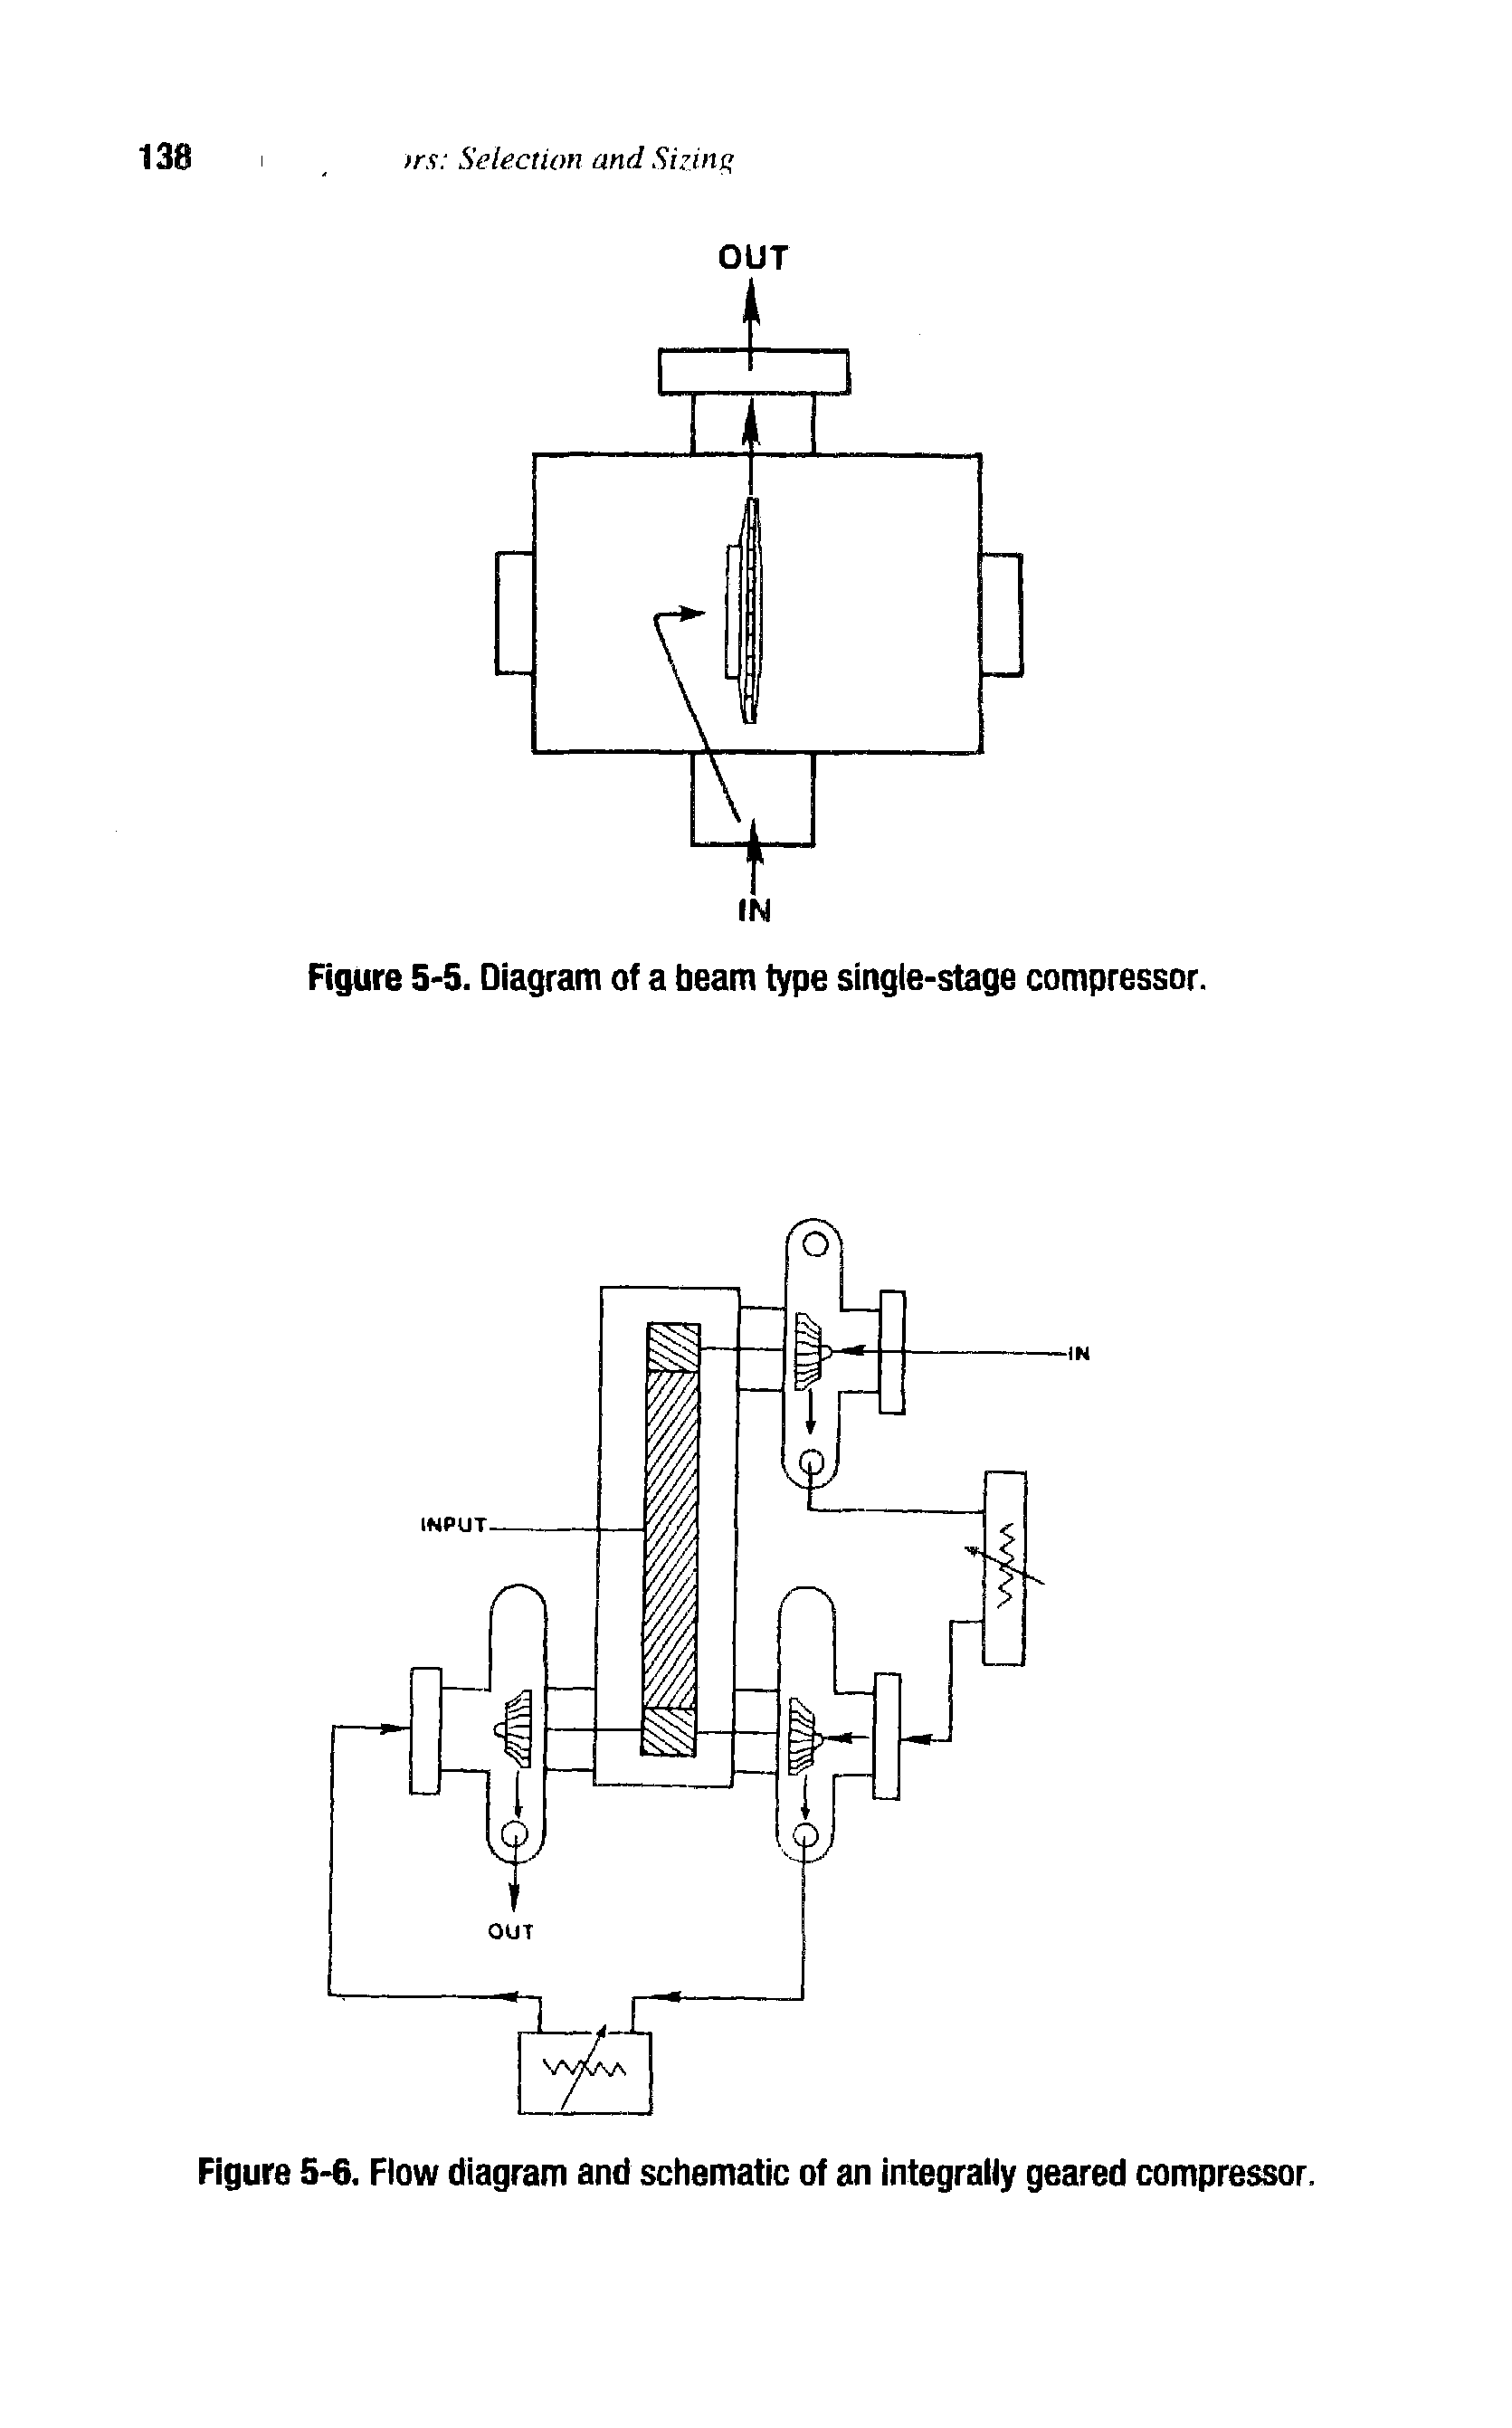 Figure 5-6. Flow diagram and schematic of an integrally geared compressor.